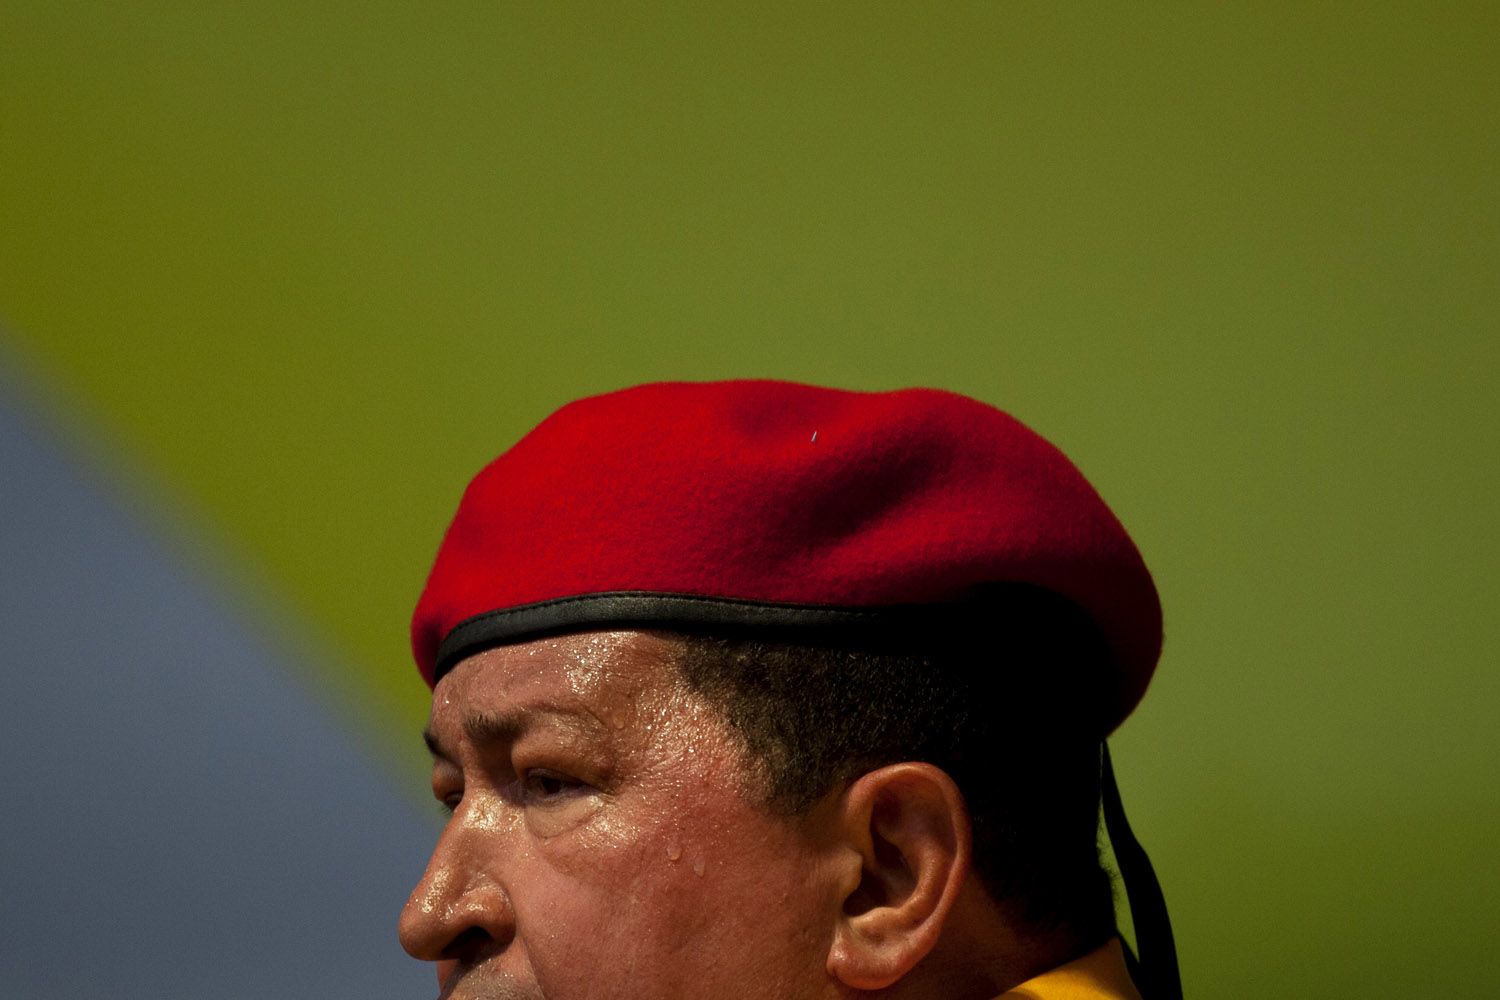 July 14, 2012. Venezuela's president Hugo Chavez dons a red beret as he speaks to supporters at a campaign rally in Barquisimeto, Venezuela.